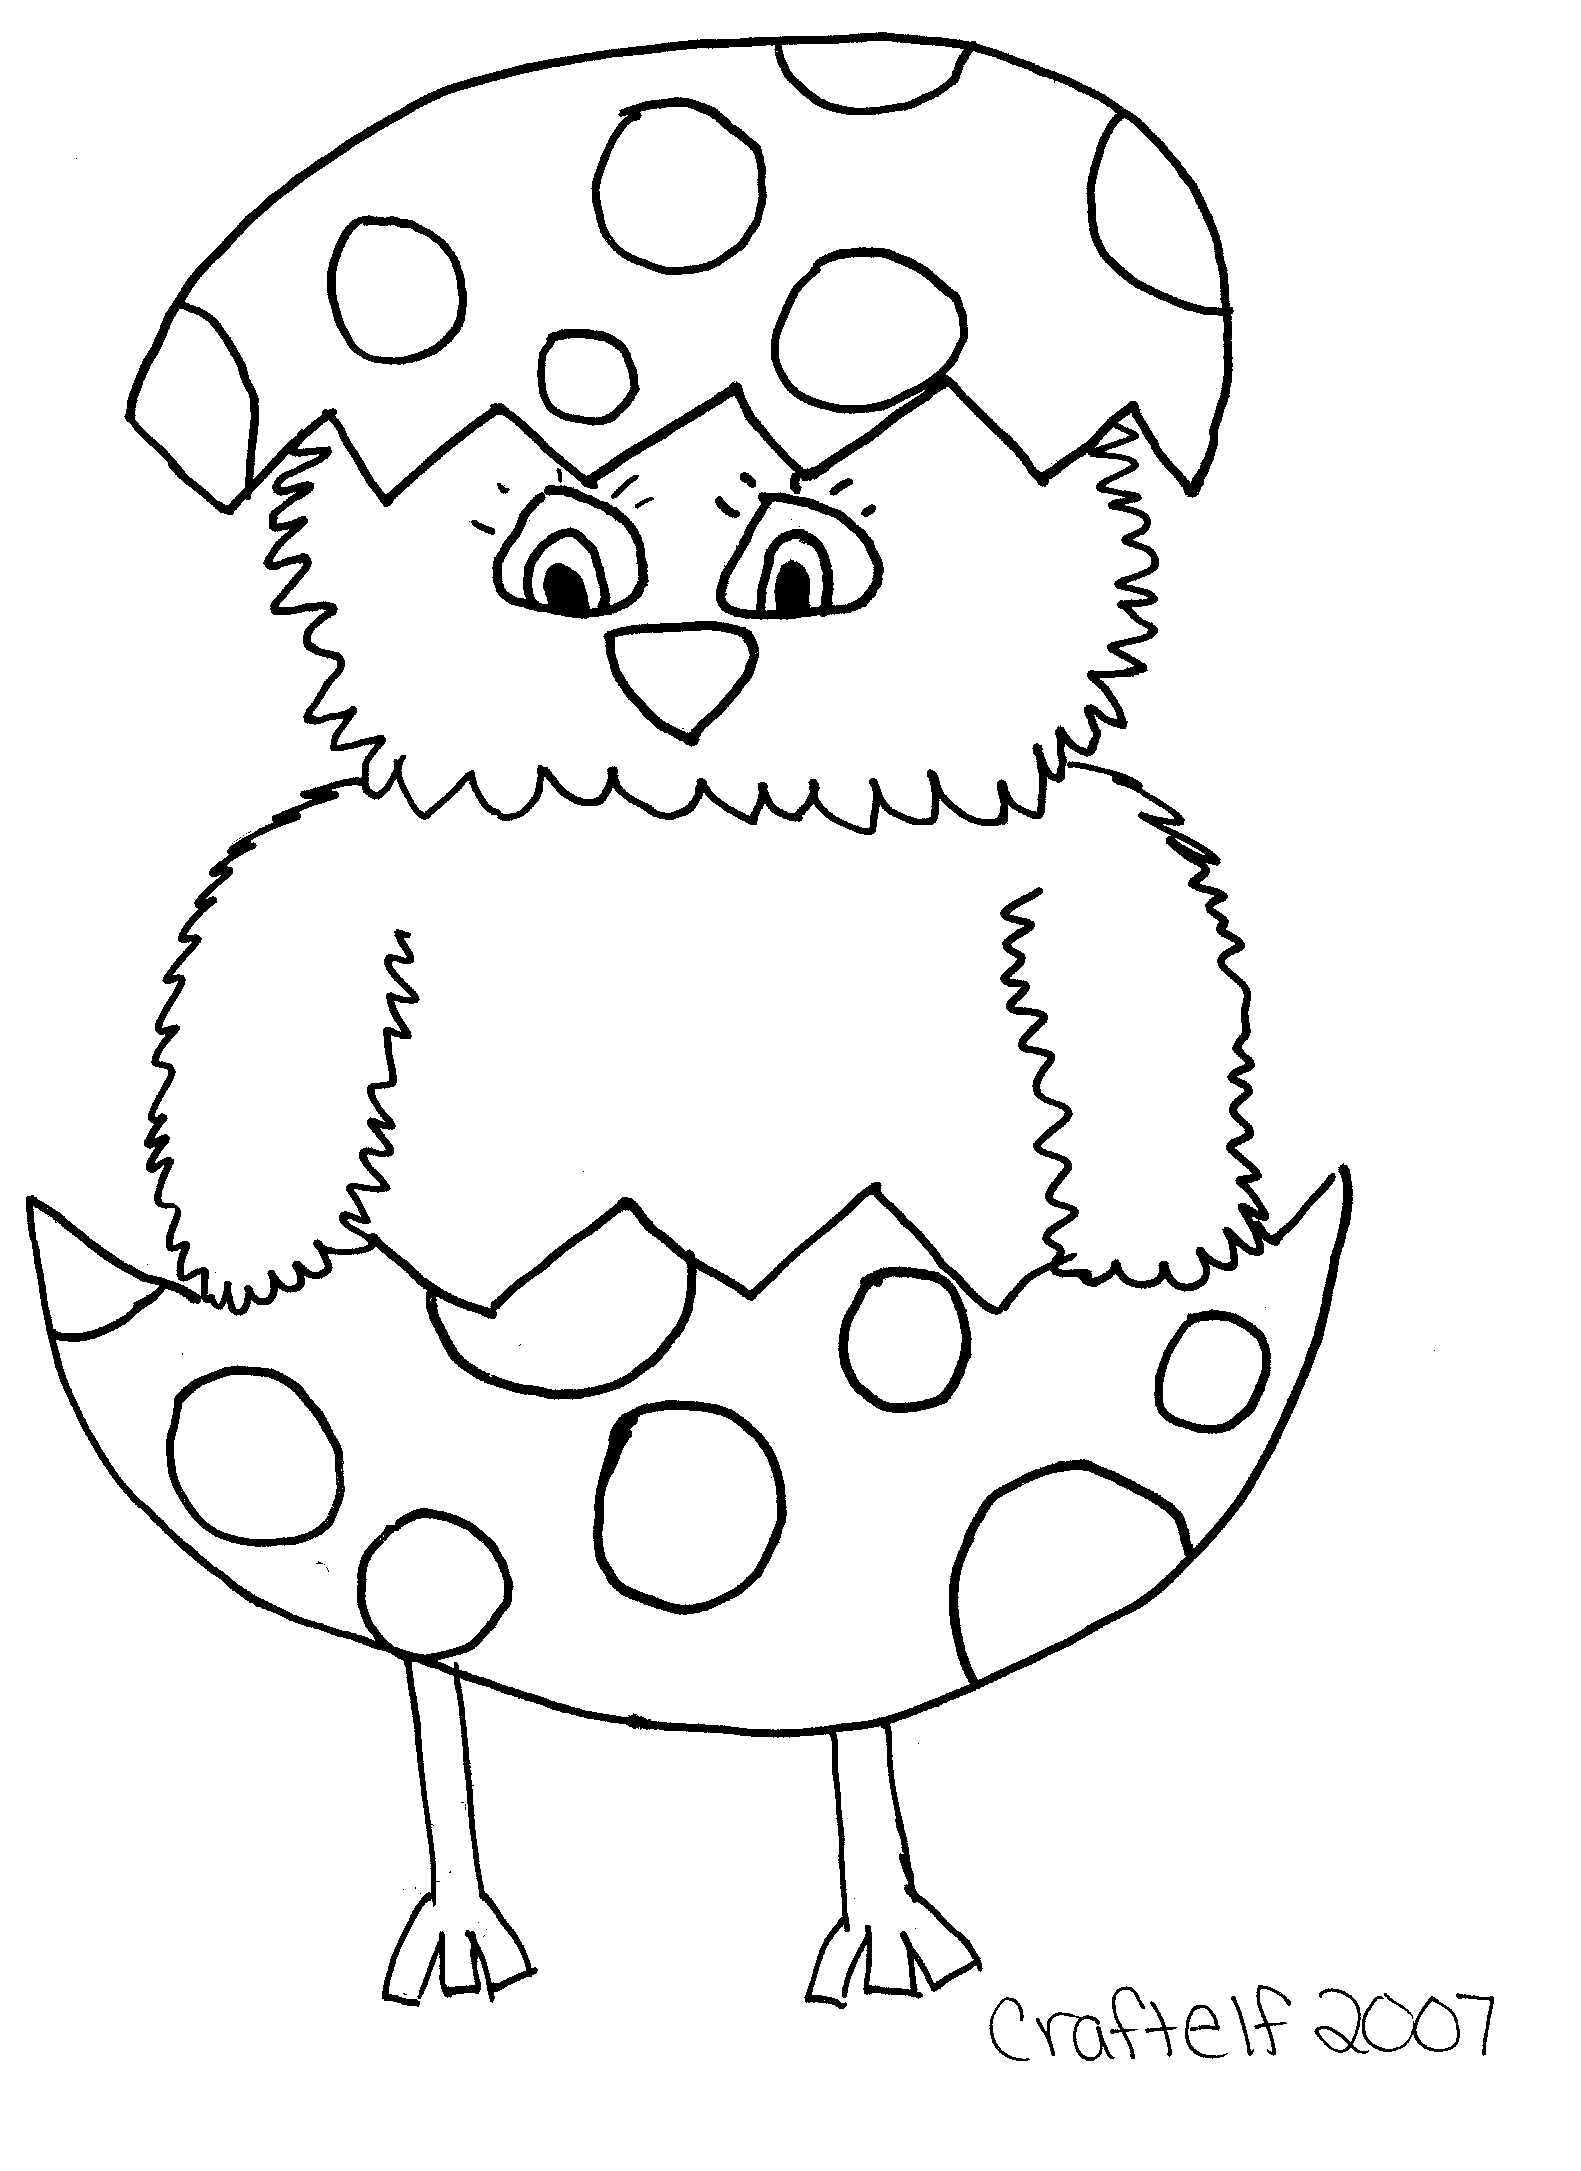 printable easter pictures free easter egg coloring pages children39s templates easter pictures printable 